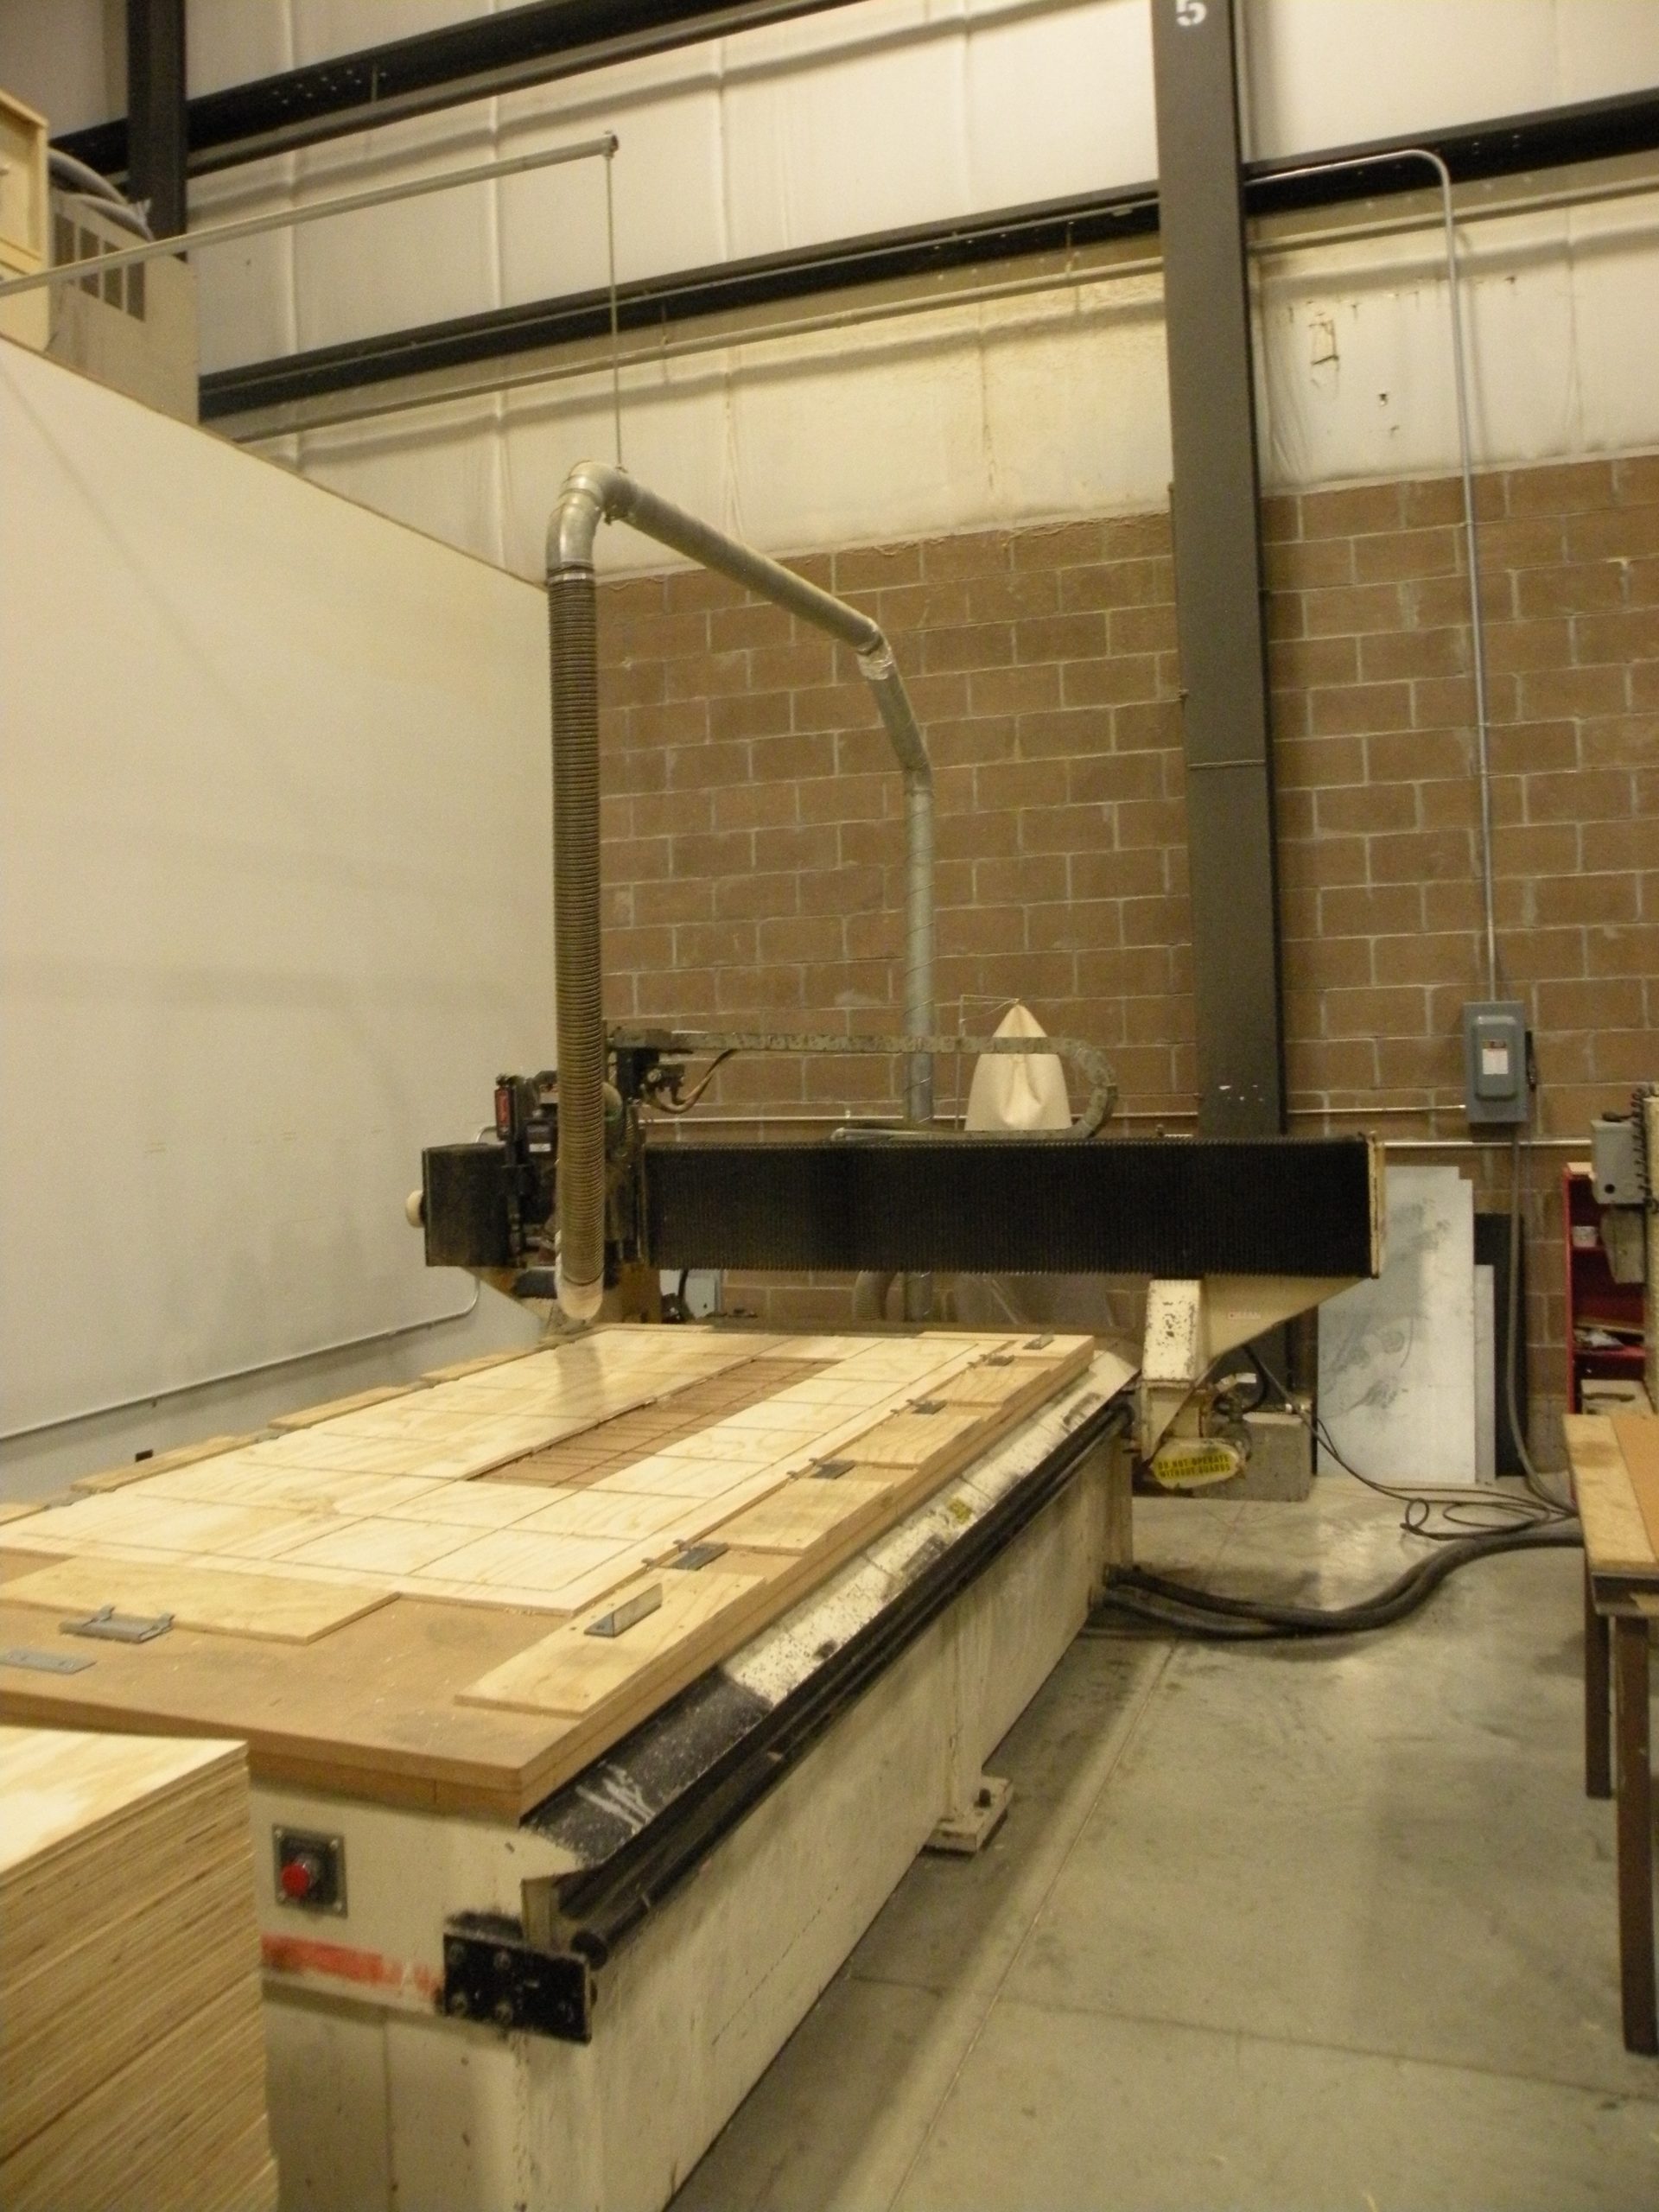 Thermwood Cartesian5 CNC Router MachMotion Upgrade